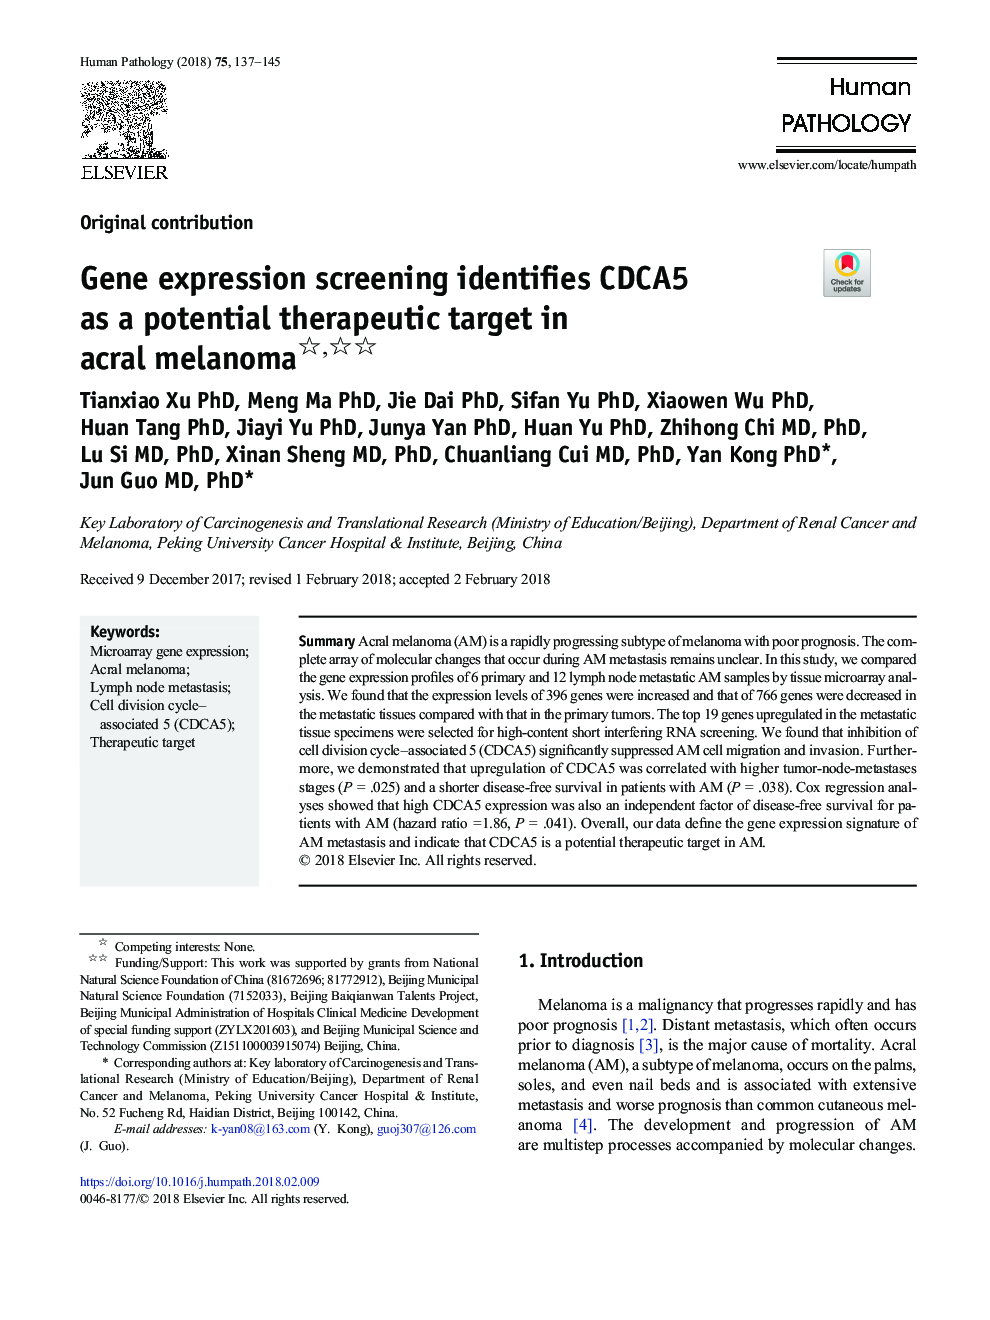 Gene expression screening identifies CDCA5 as a potential therapeutic target in acral melanoma